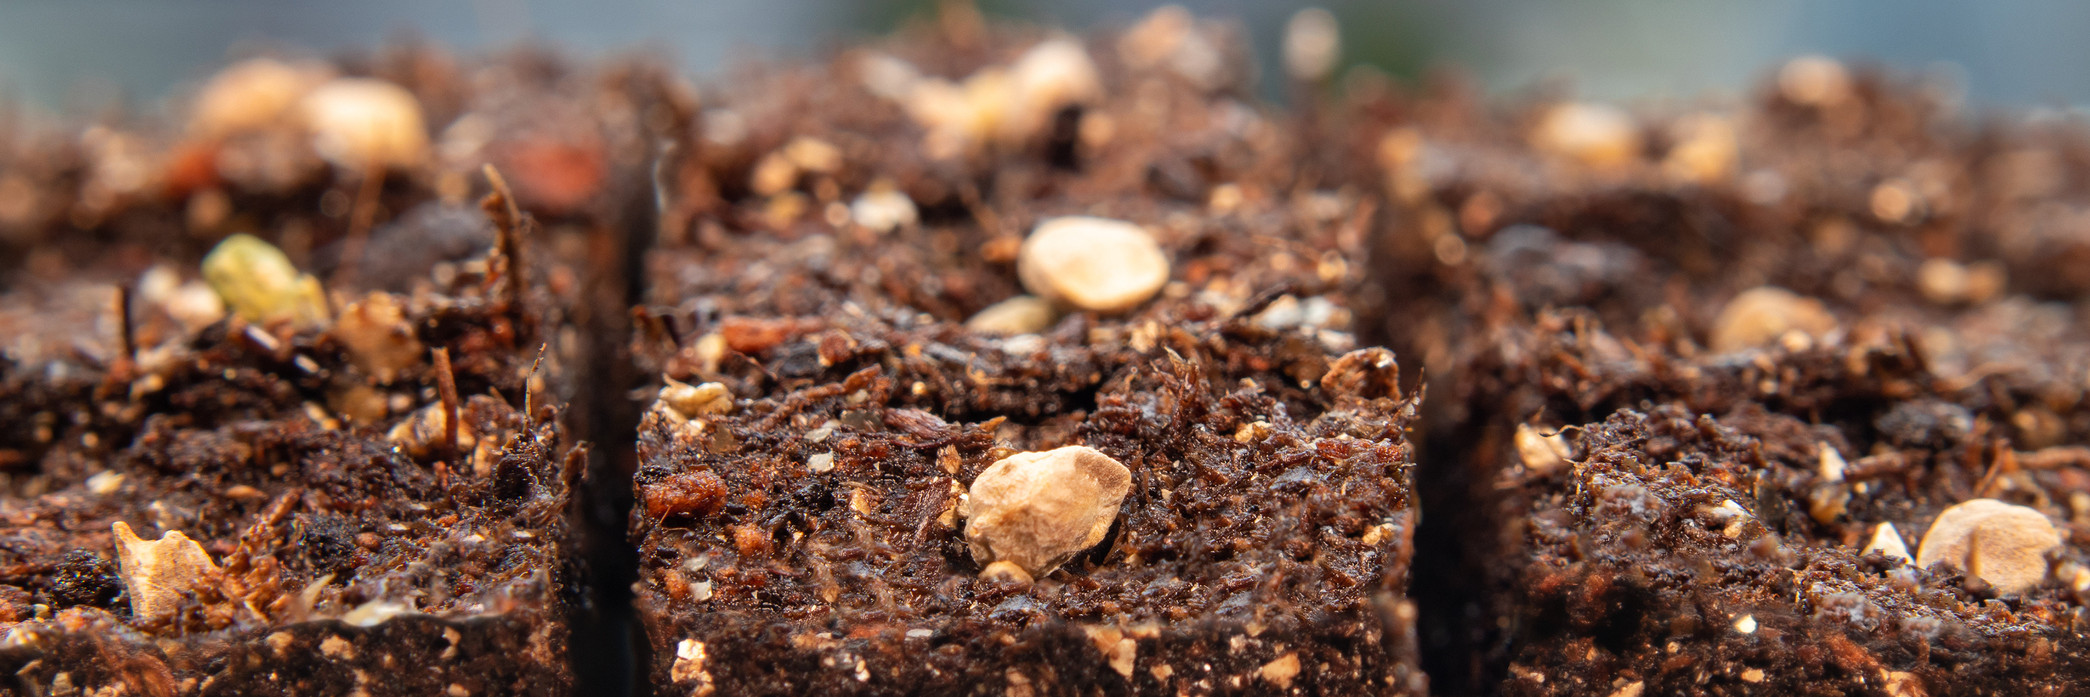 How to Make Soil Blocks for Waste-Free Seed Starting